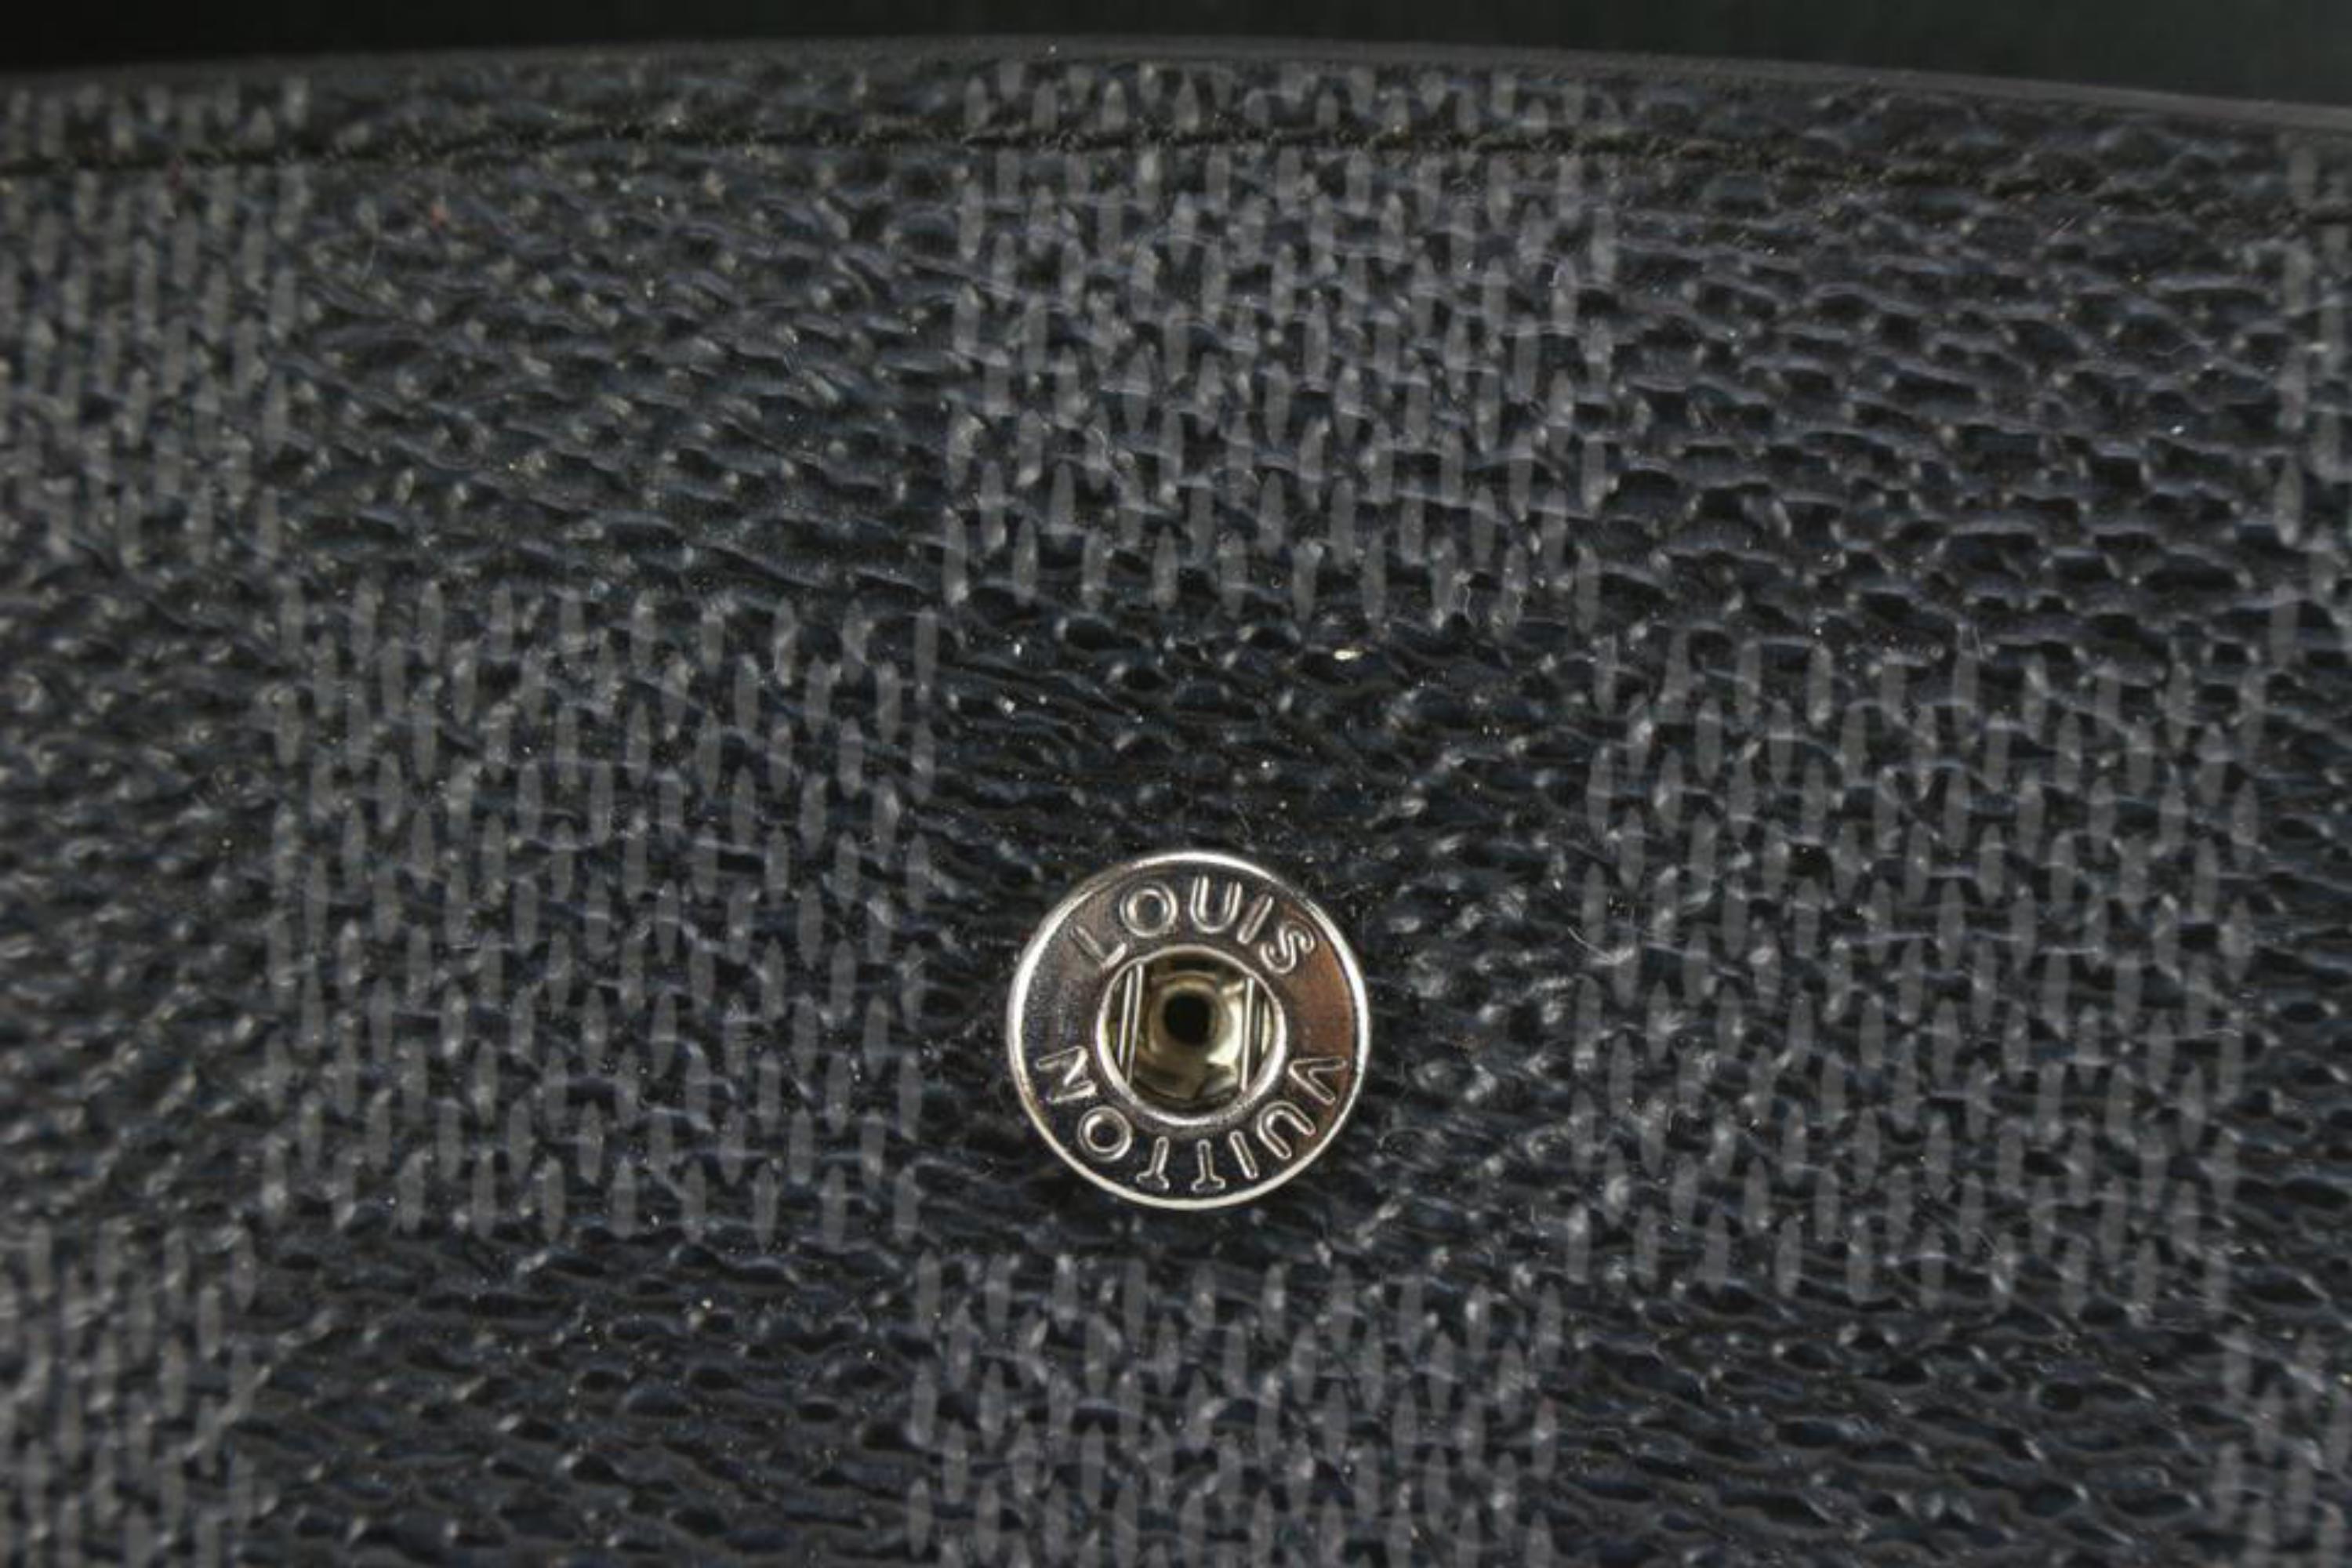 Louis Vuitton Damier Graphite Cufflink Pouch Case Holder 96lk616s In Good Condition For Sale In Dix hills, NY